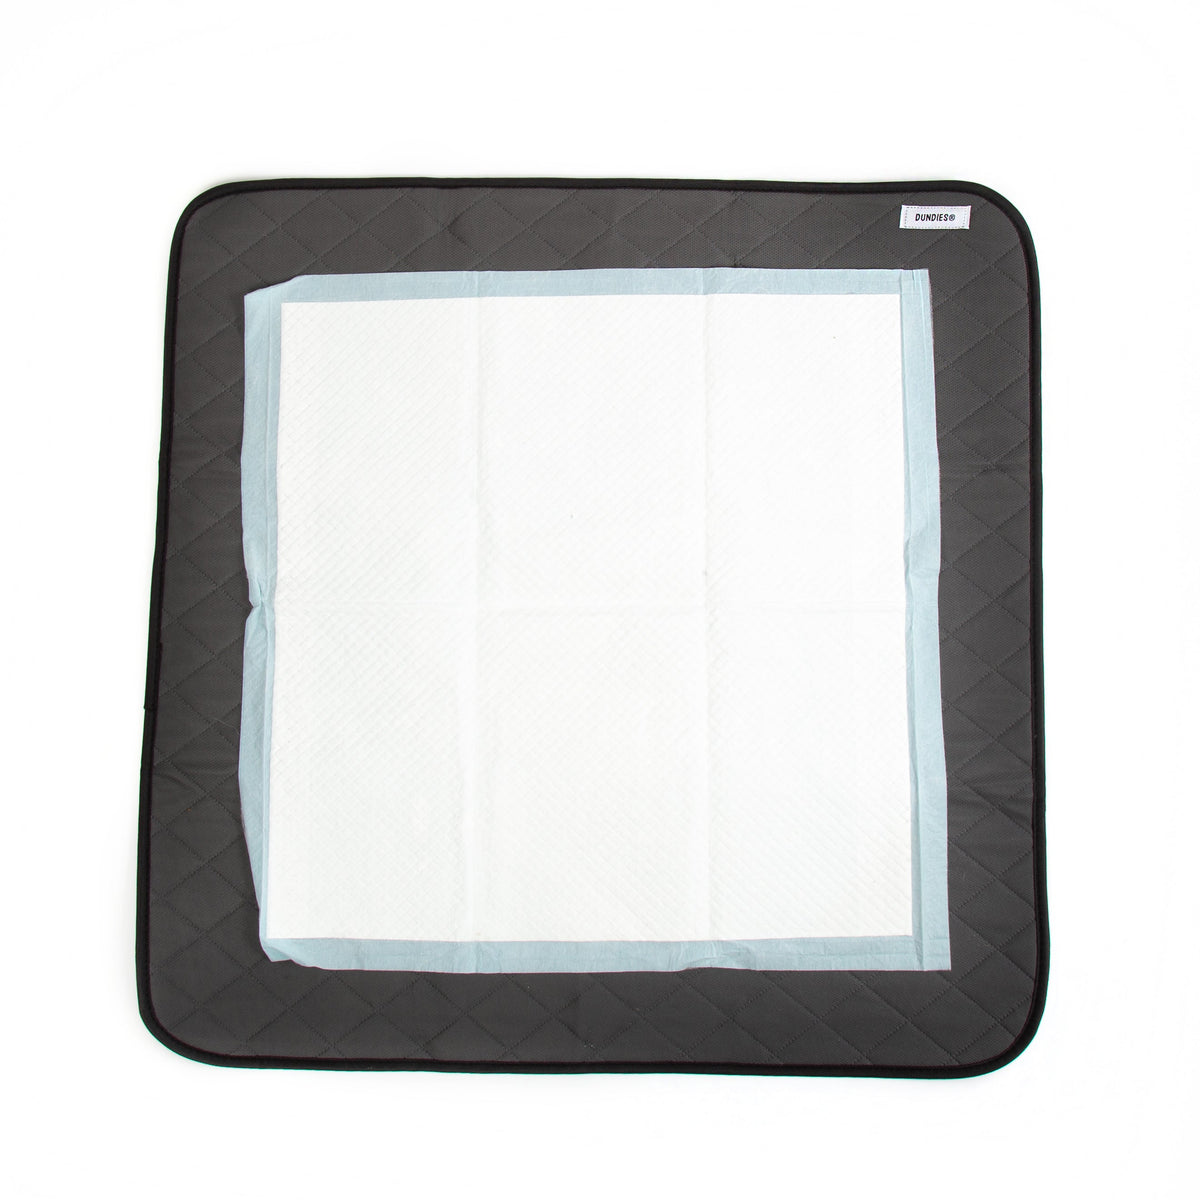 Dundies® Washable Puppy Pad-Dundies Australia - Vet Recommended Pet Nappies